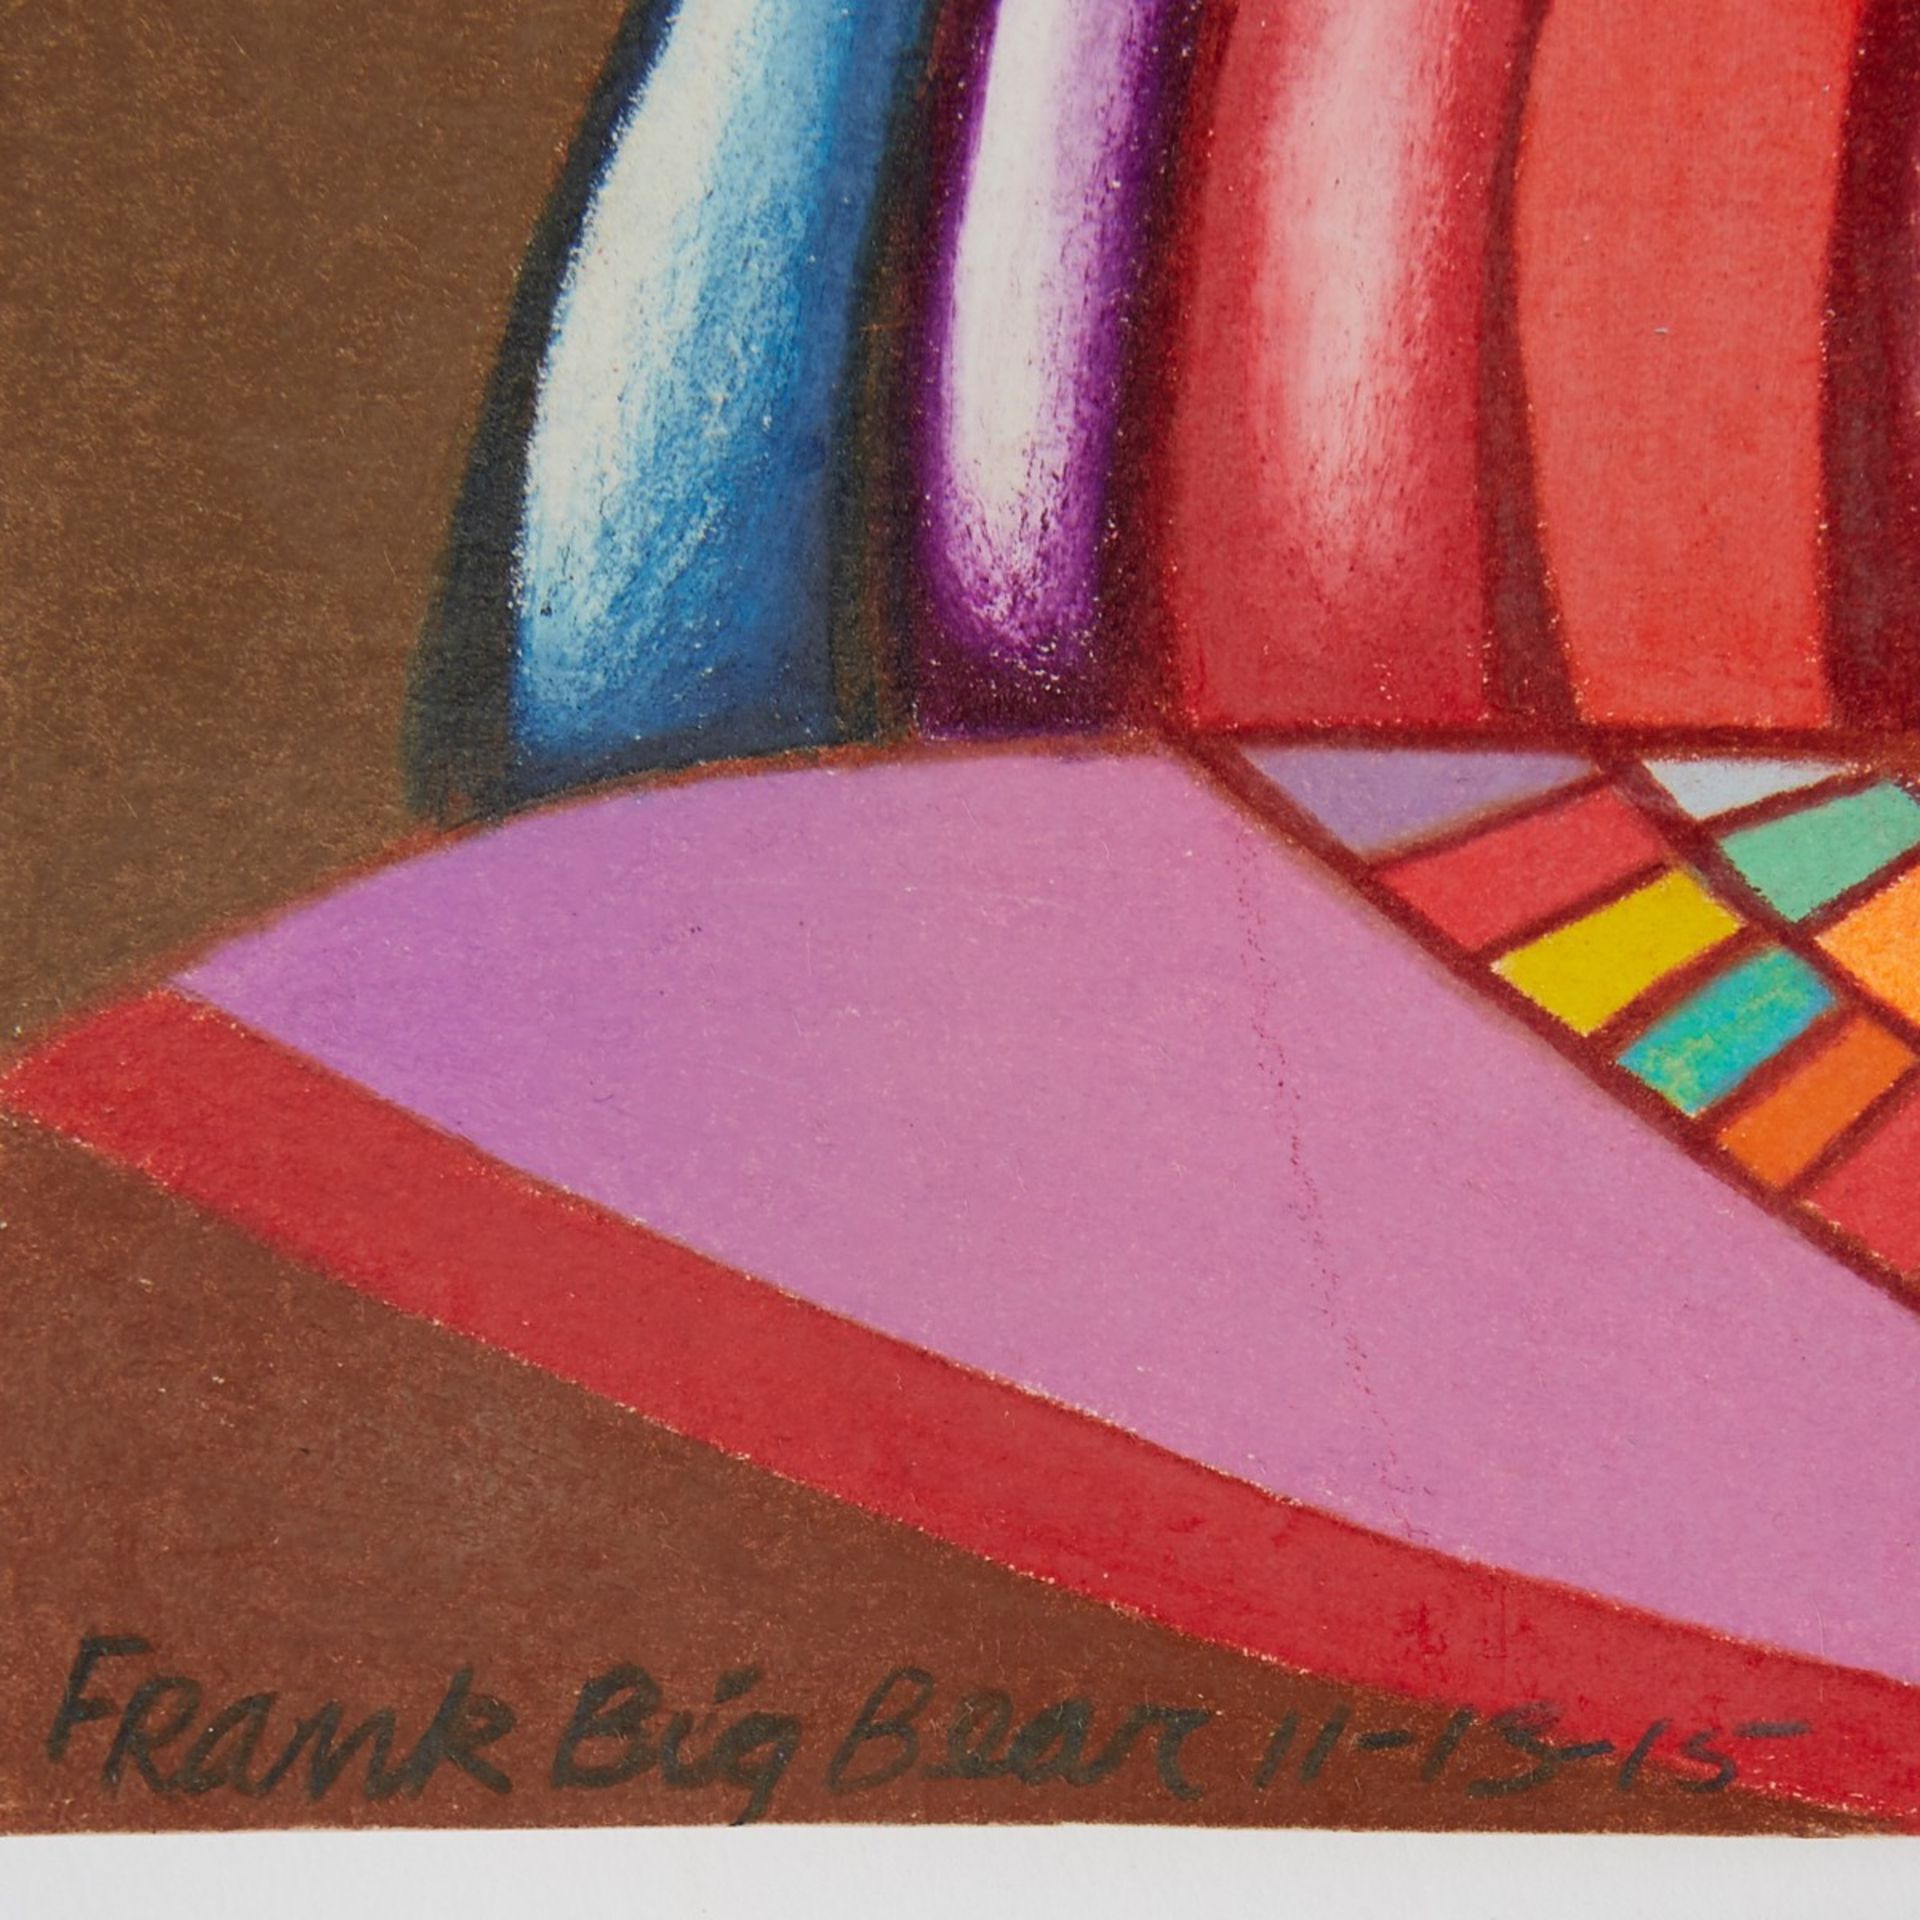 Frank Big Bear Drawing for Sienna Colored Pencil on Paper - Bild 3 aus 4